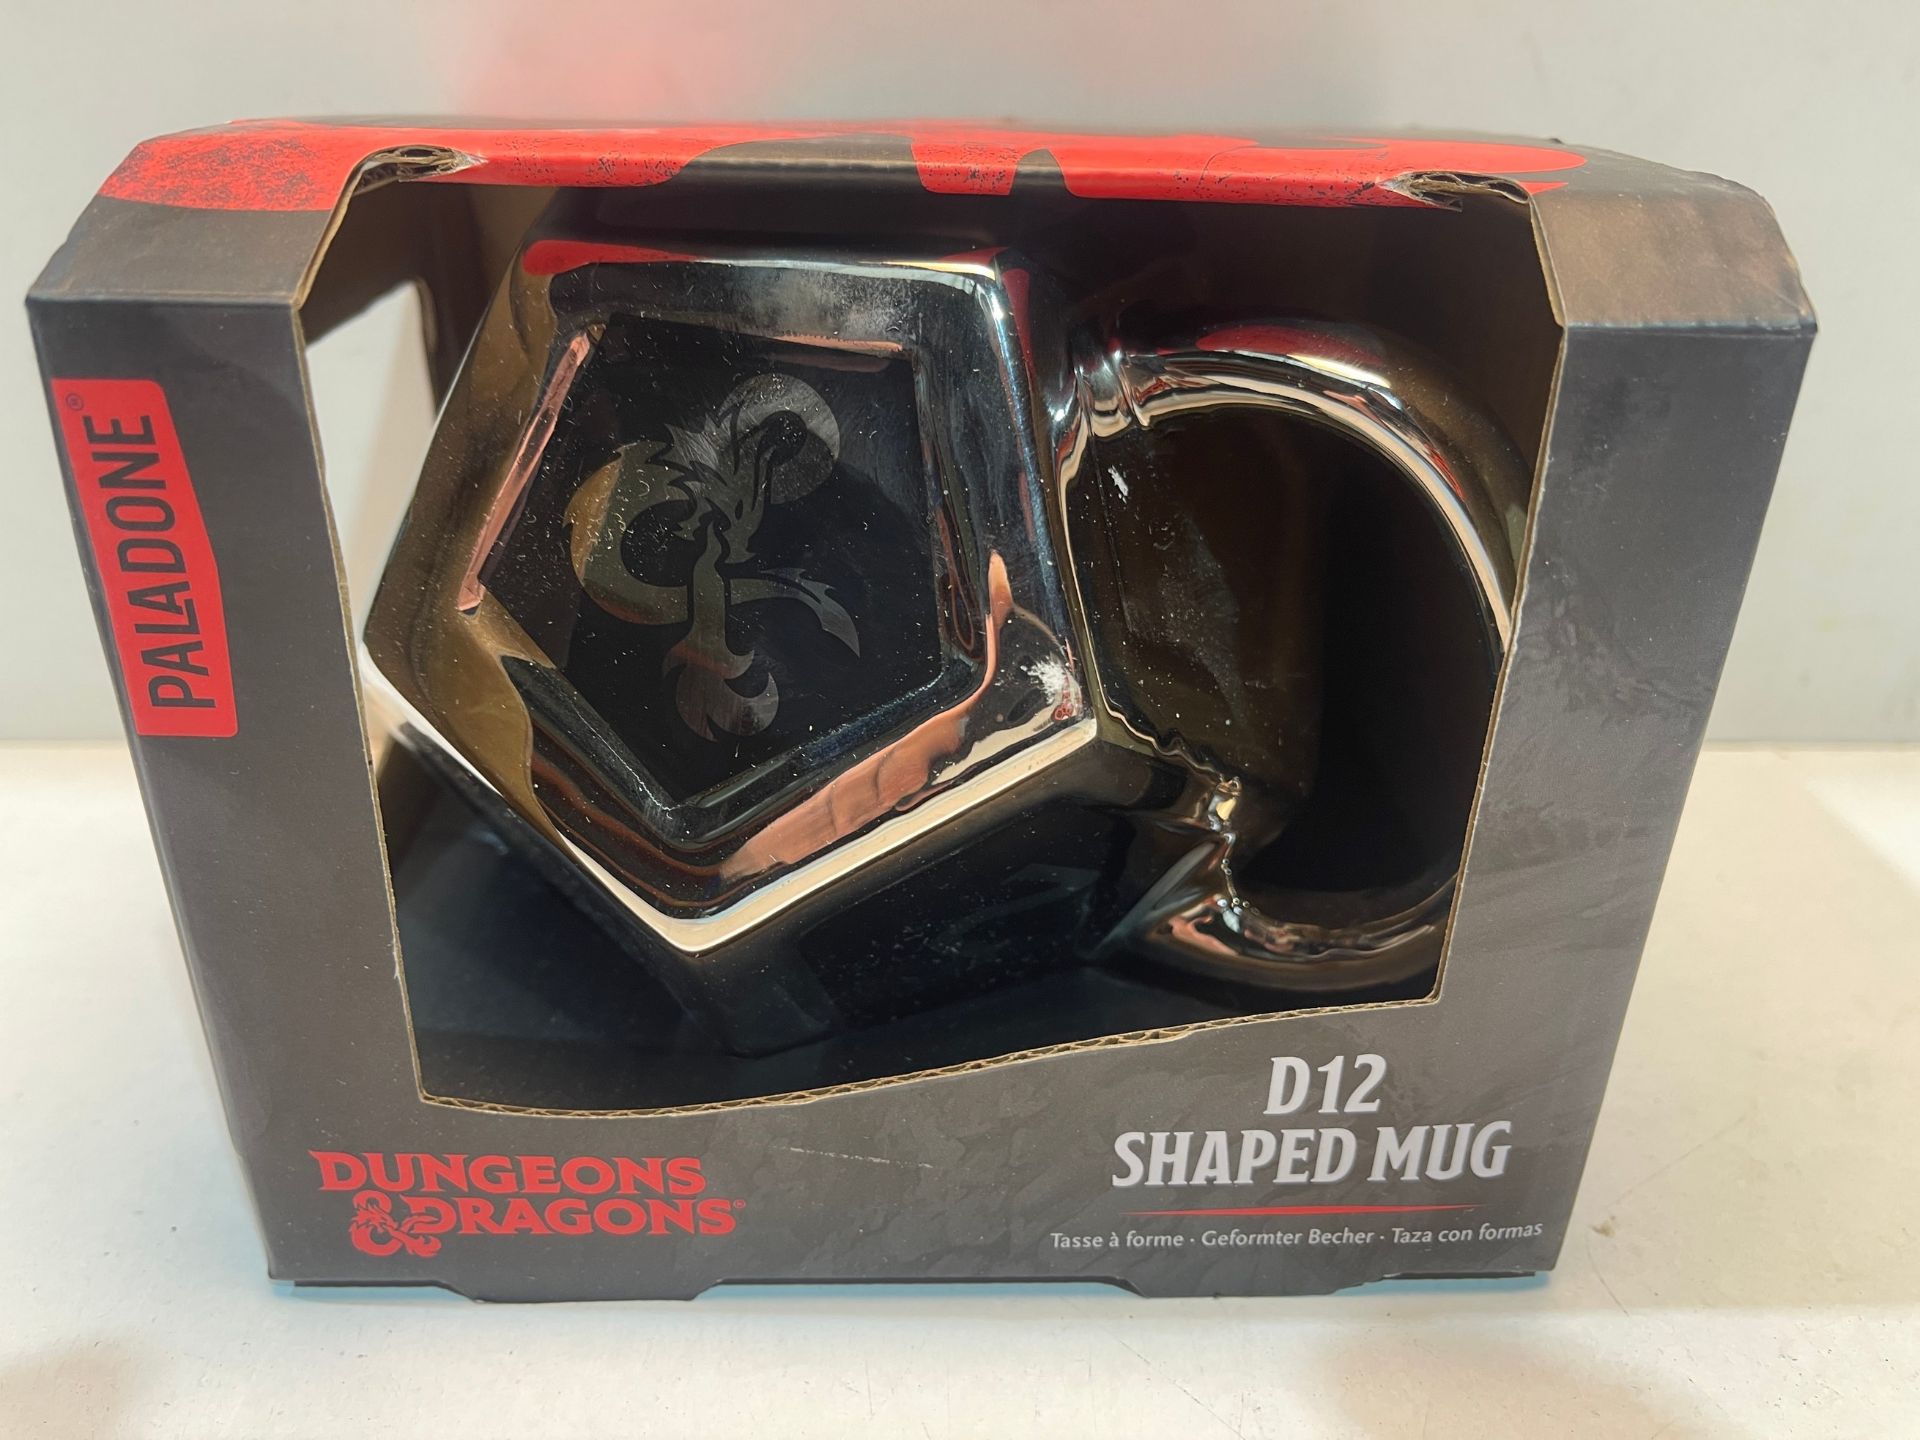 Paladone PP6640DD Dungeons and Dragons D12 Dice Shaped Mug Â£12.99Condition ReportAppraisal - Image 2 of 2